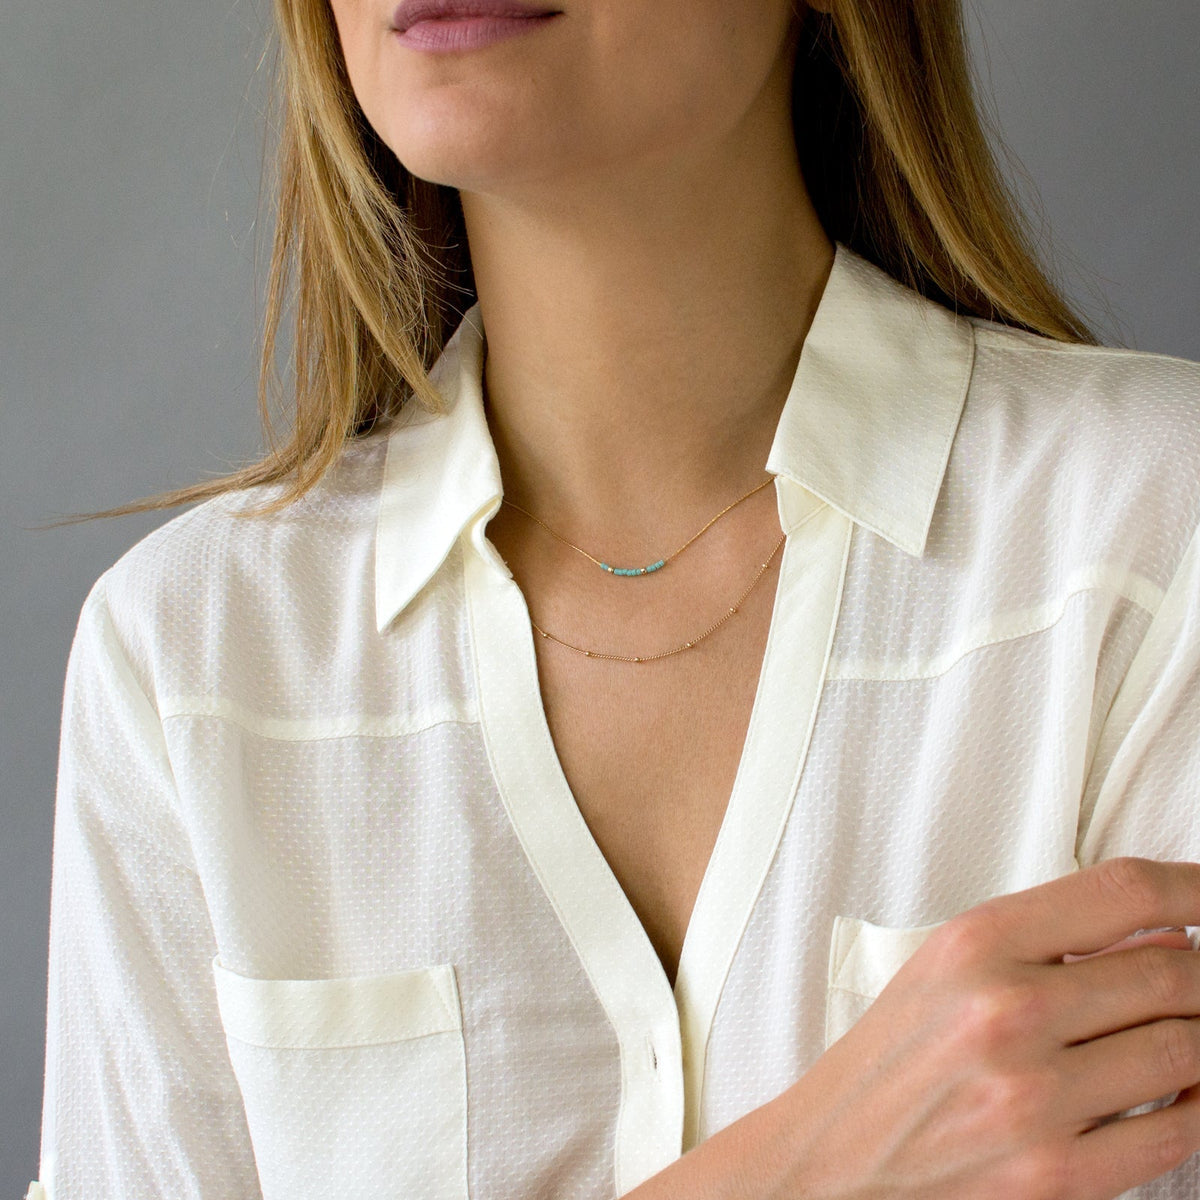 Morse Code Necklace - Inspiration Collection